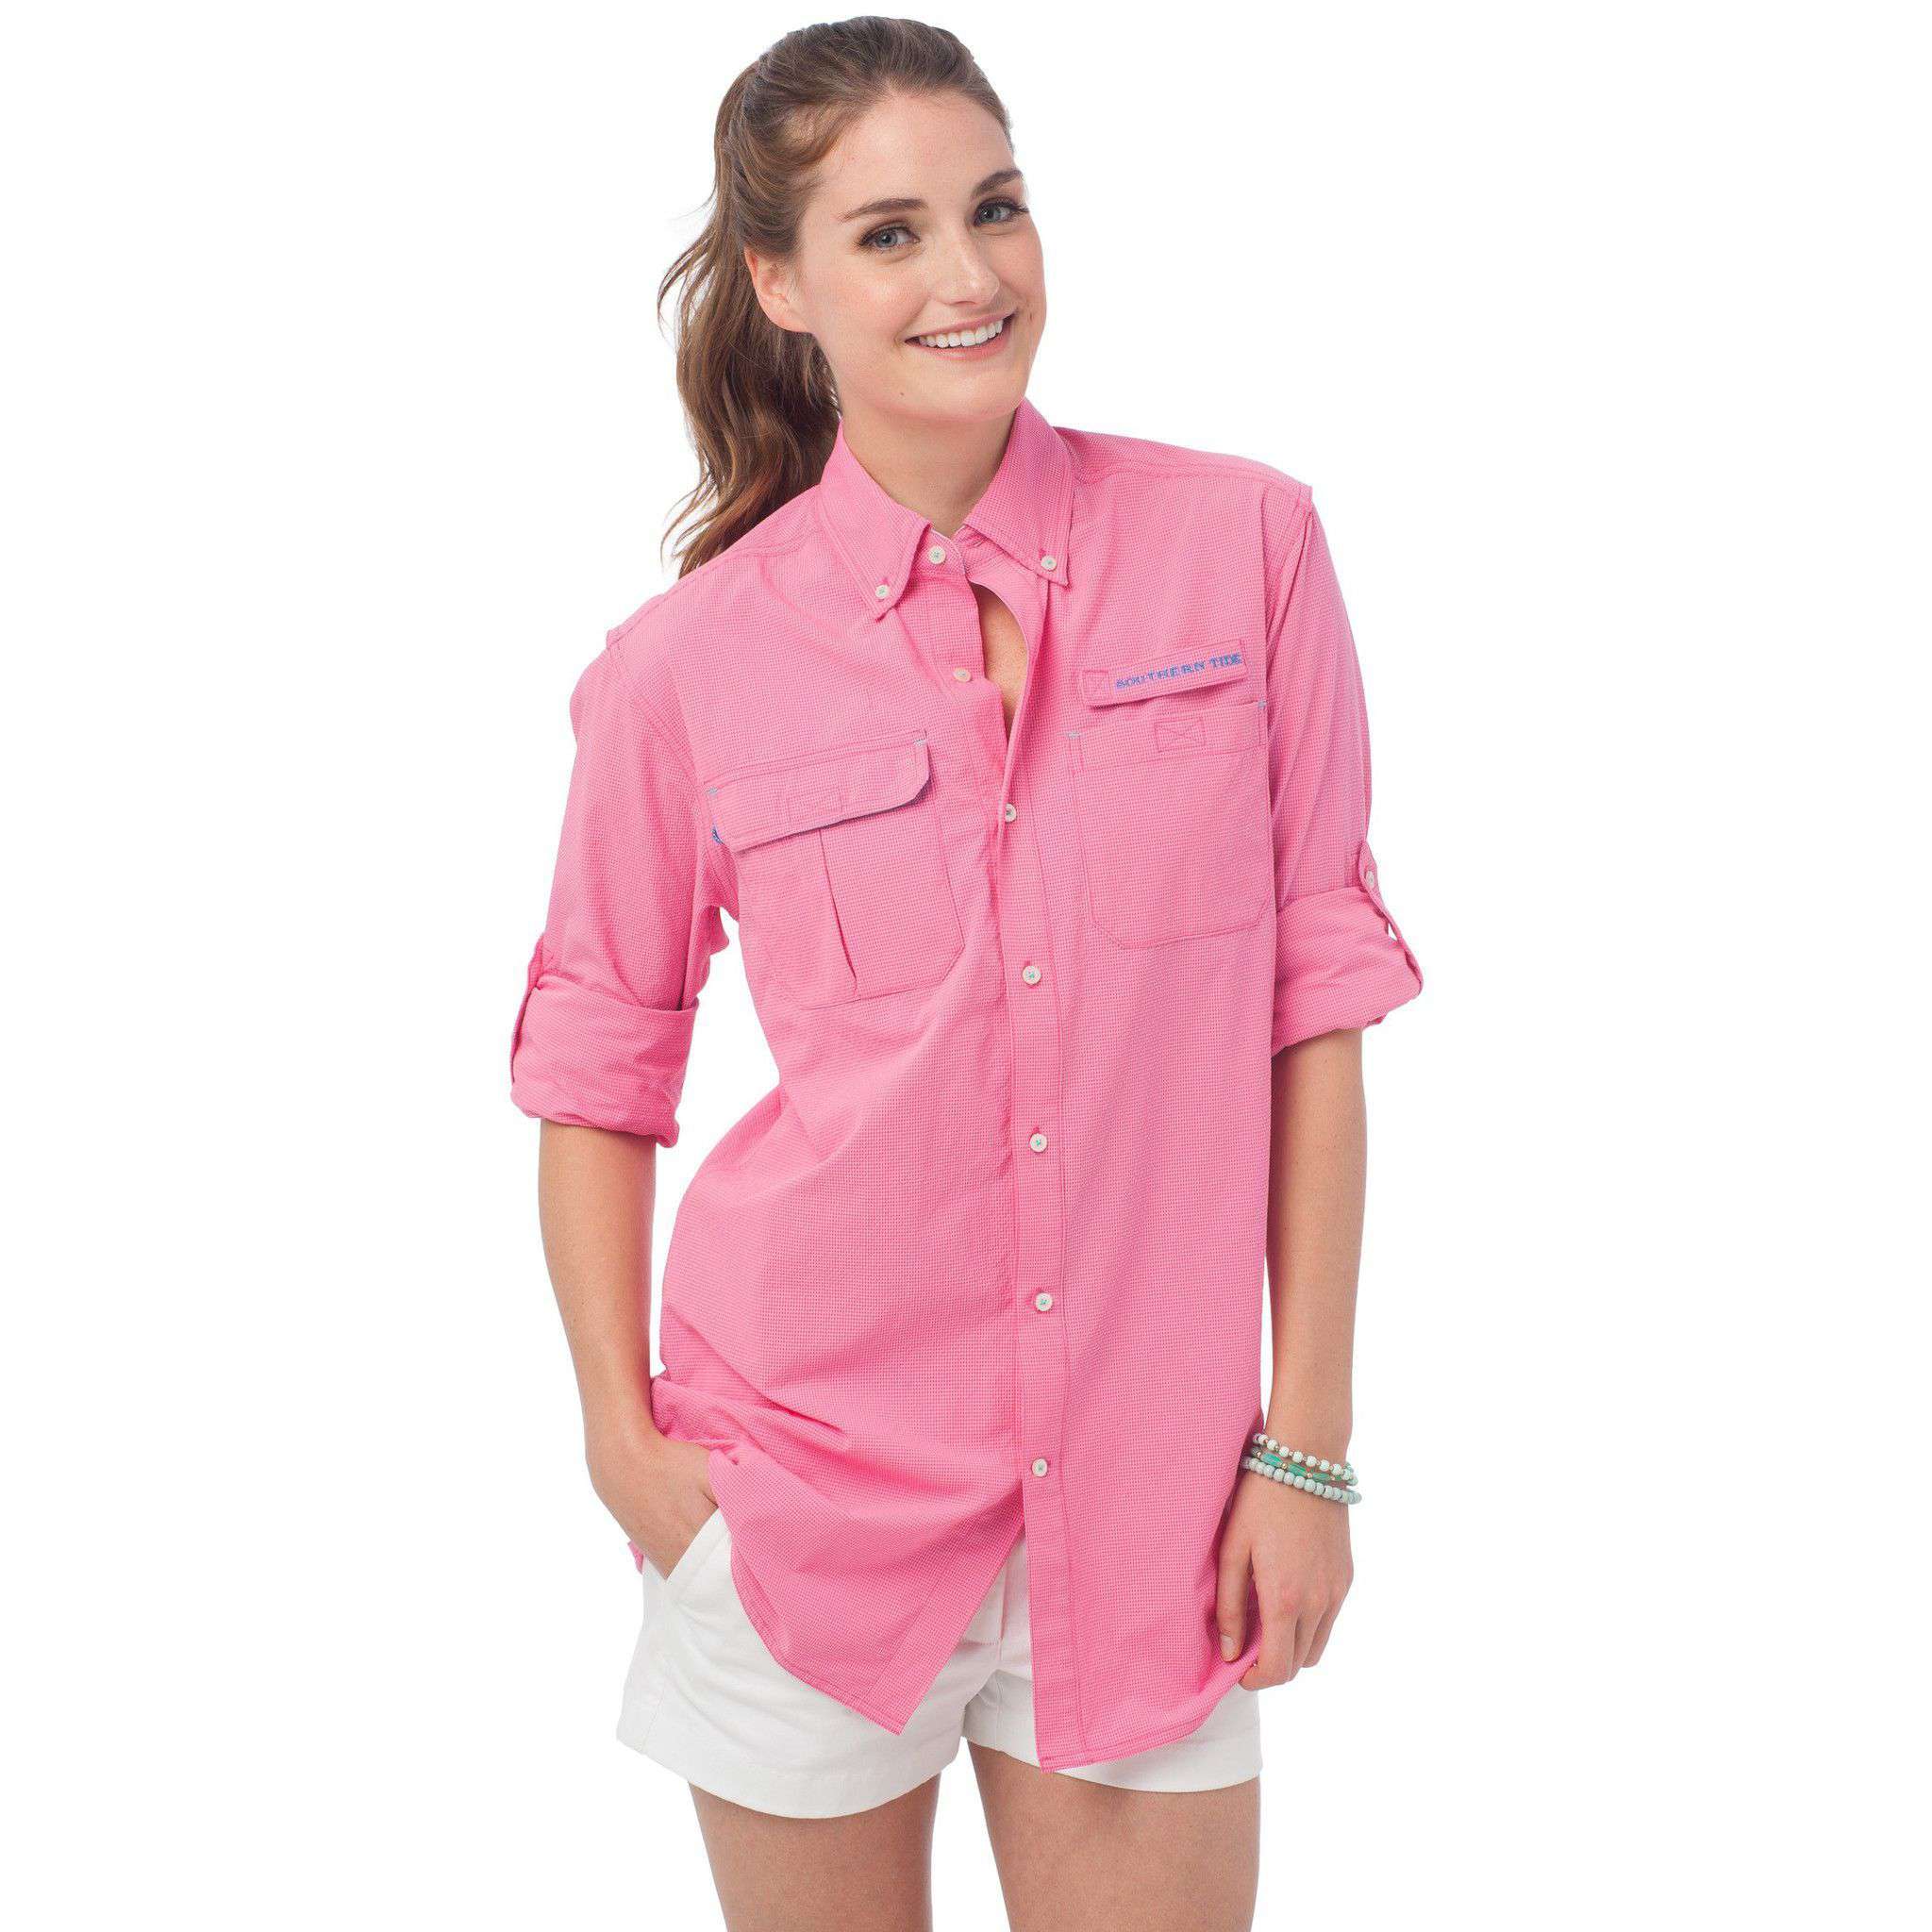 Women's Sullivan Fishing Shirt in Berry Check by Southern Tide - Country Club Prep